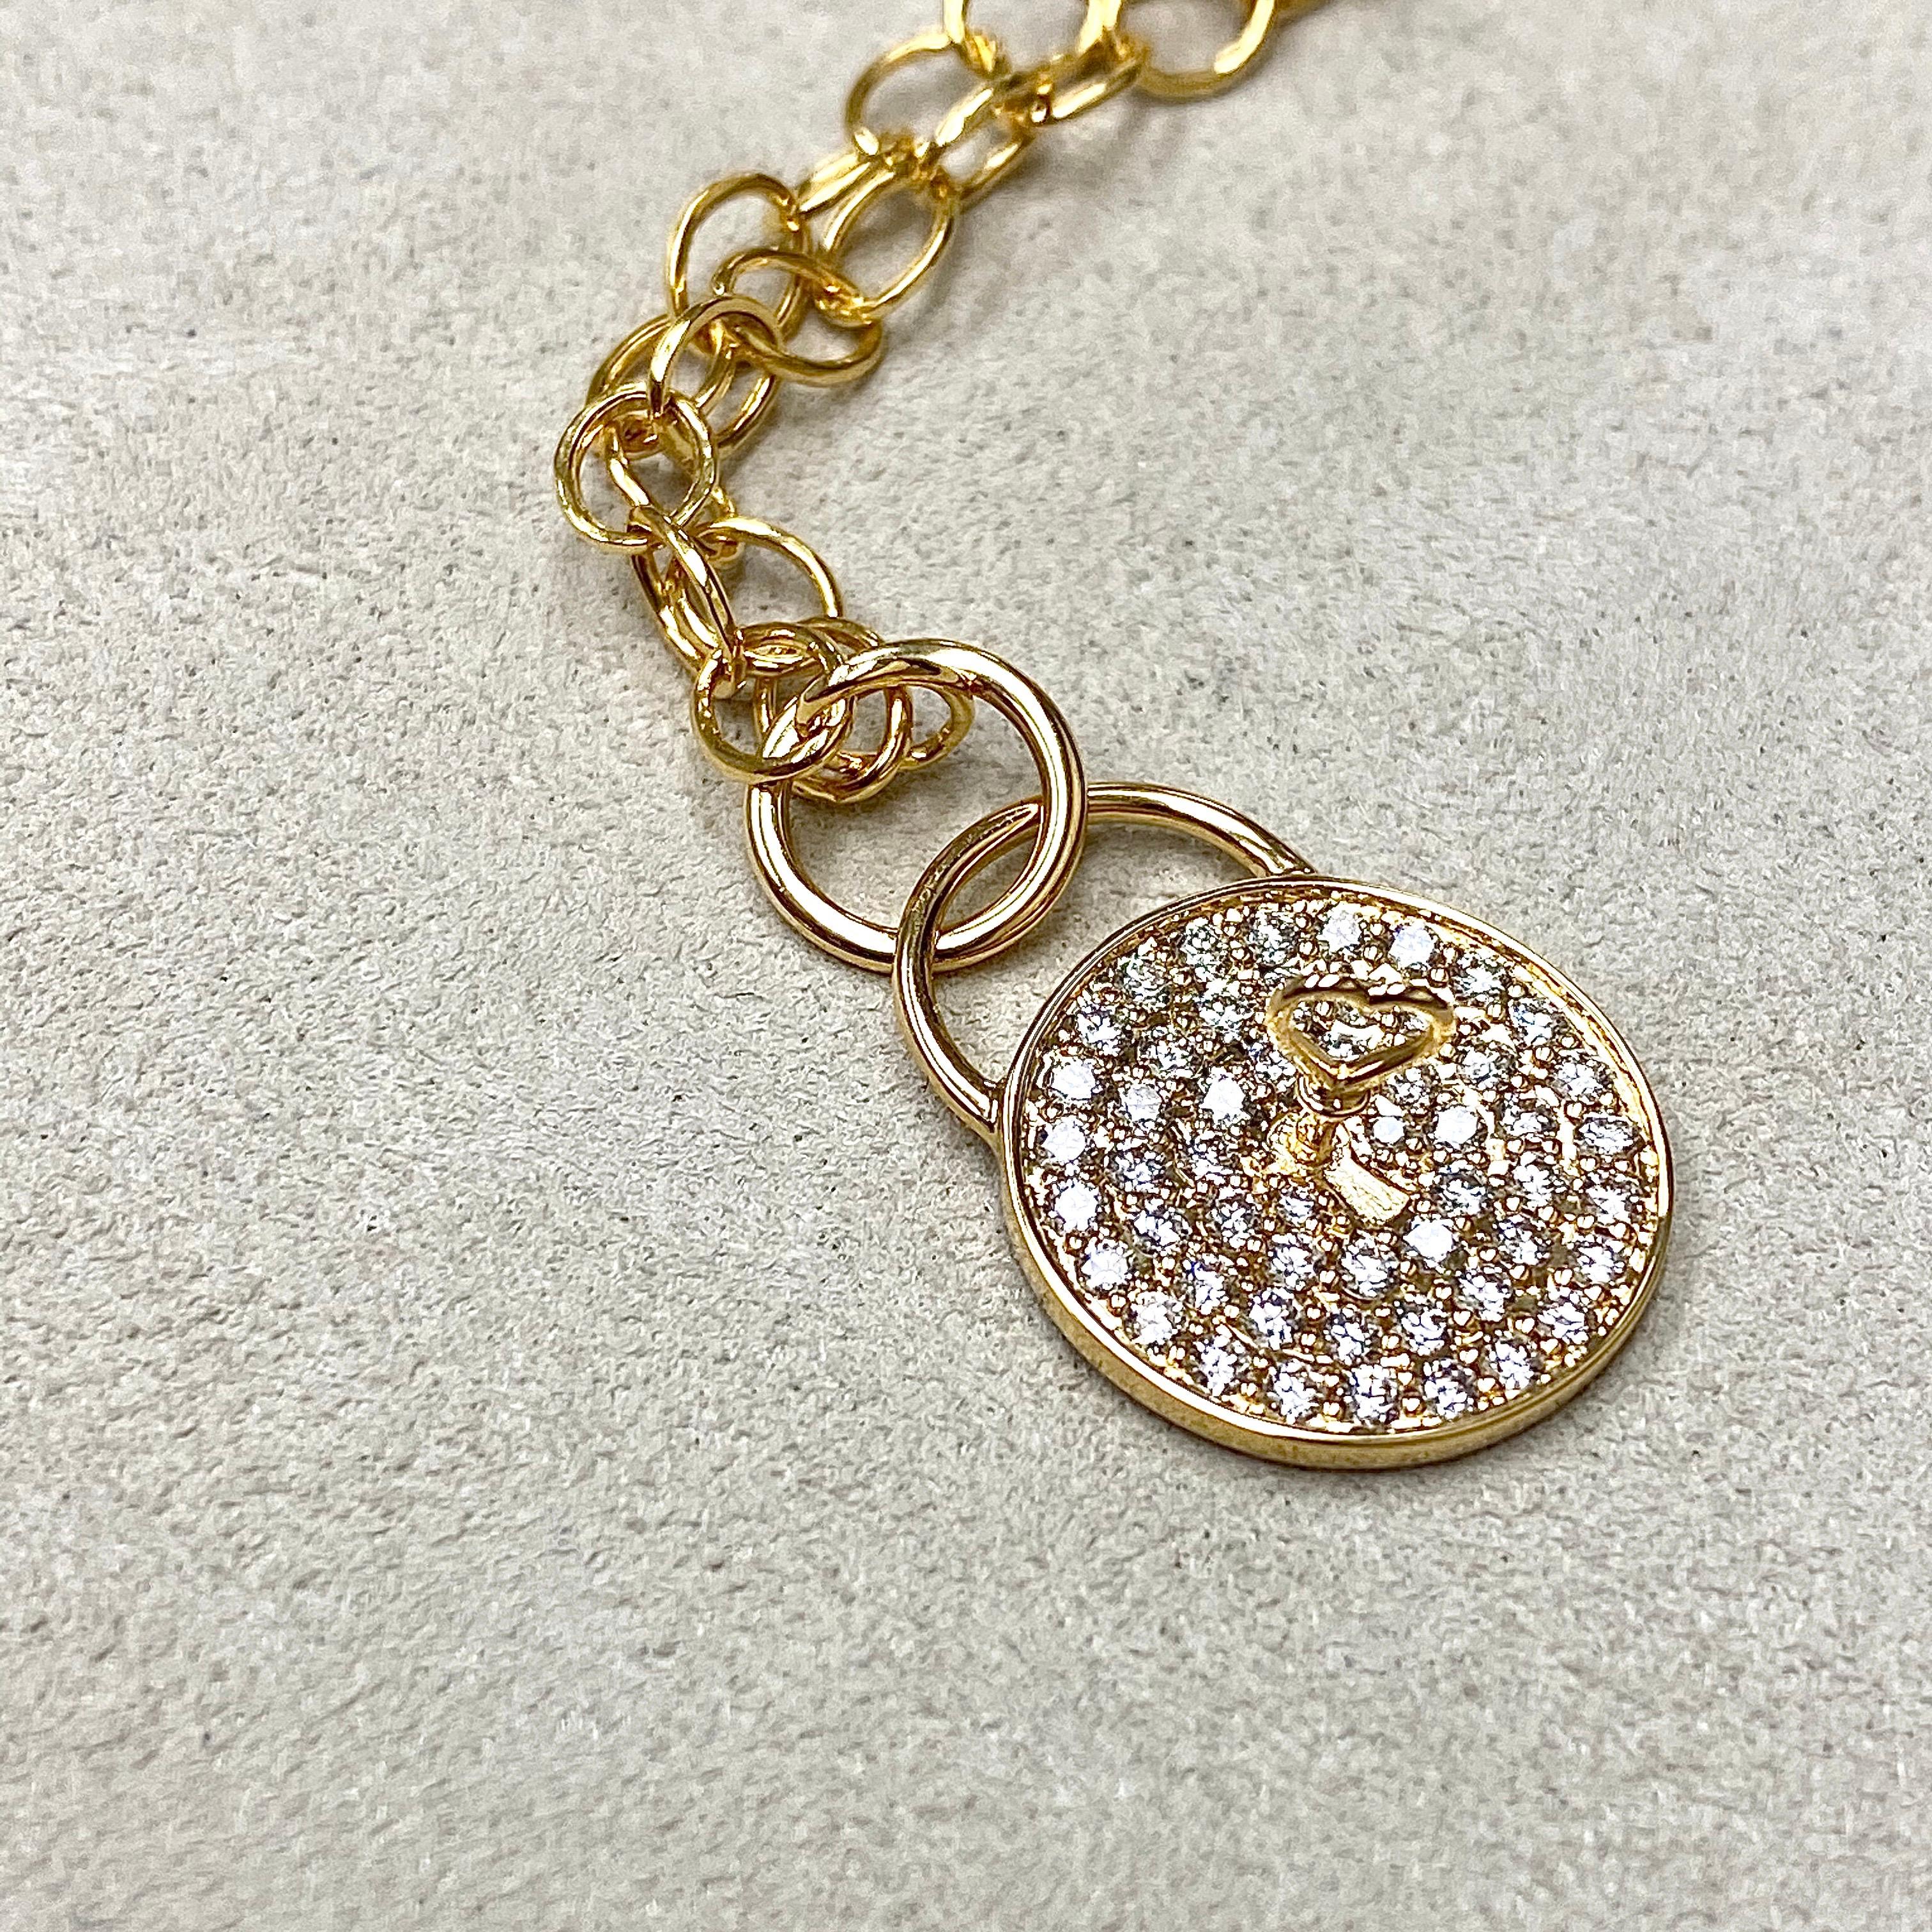 Round Cut Syna Yellow Gold Love Locked Pendant with Champagne Diamonds